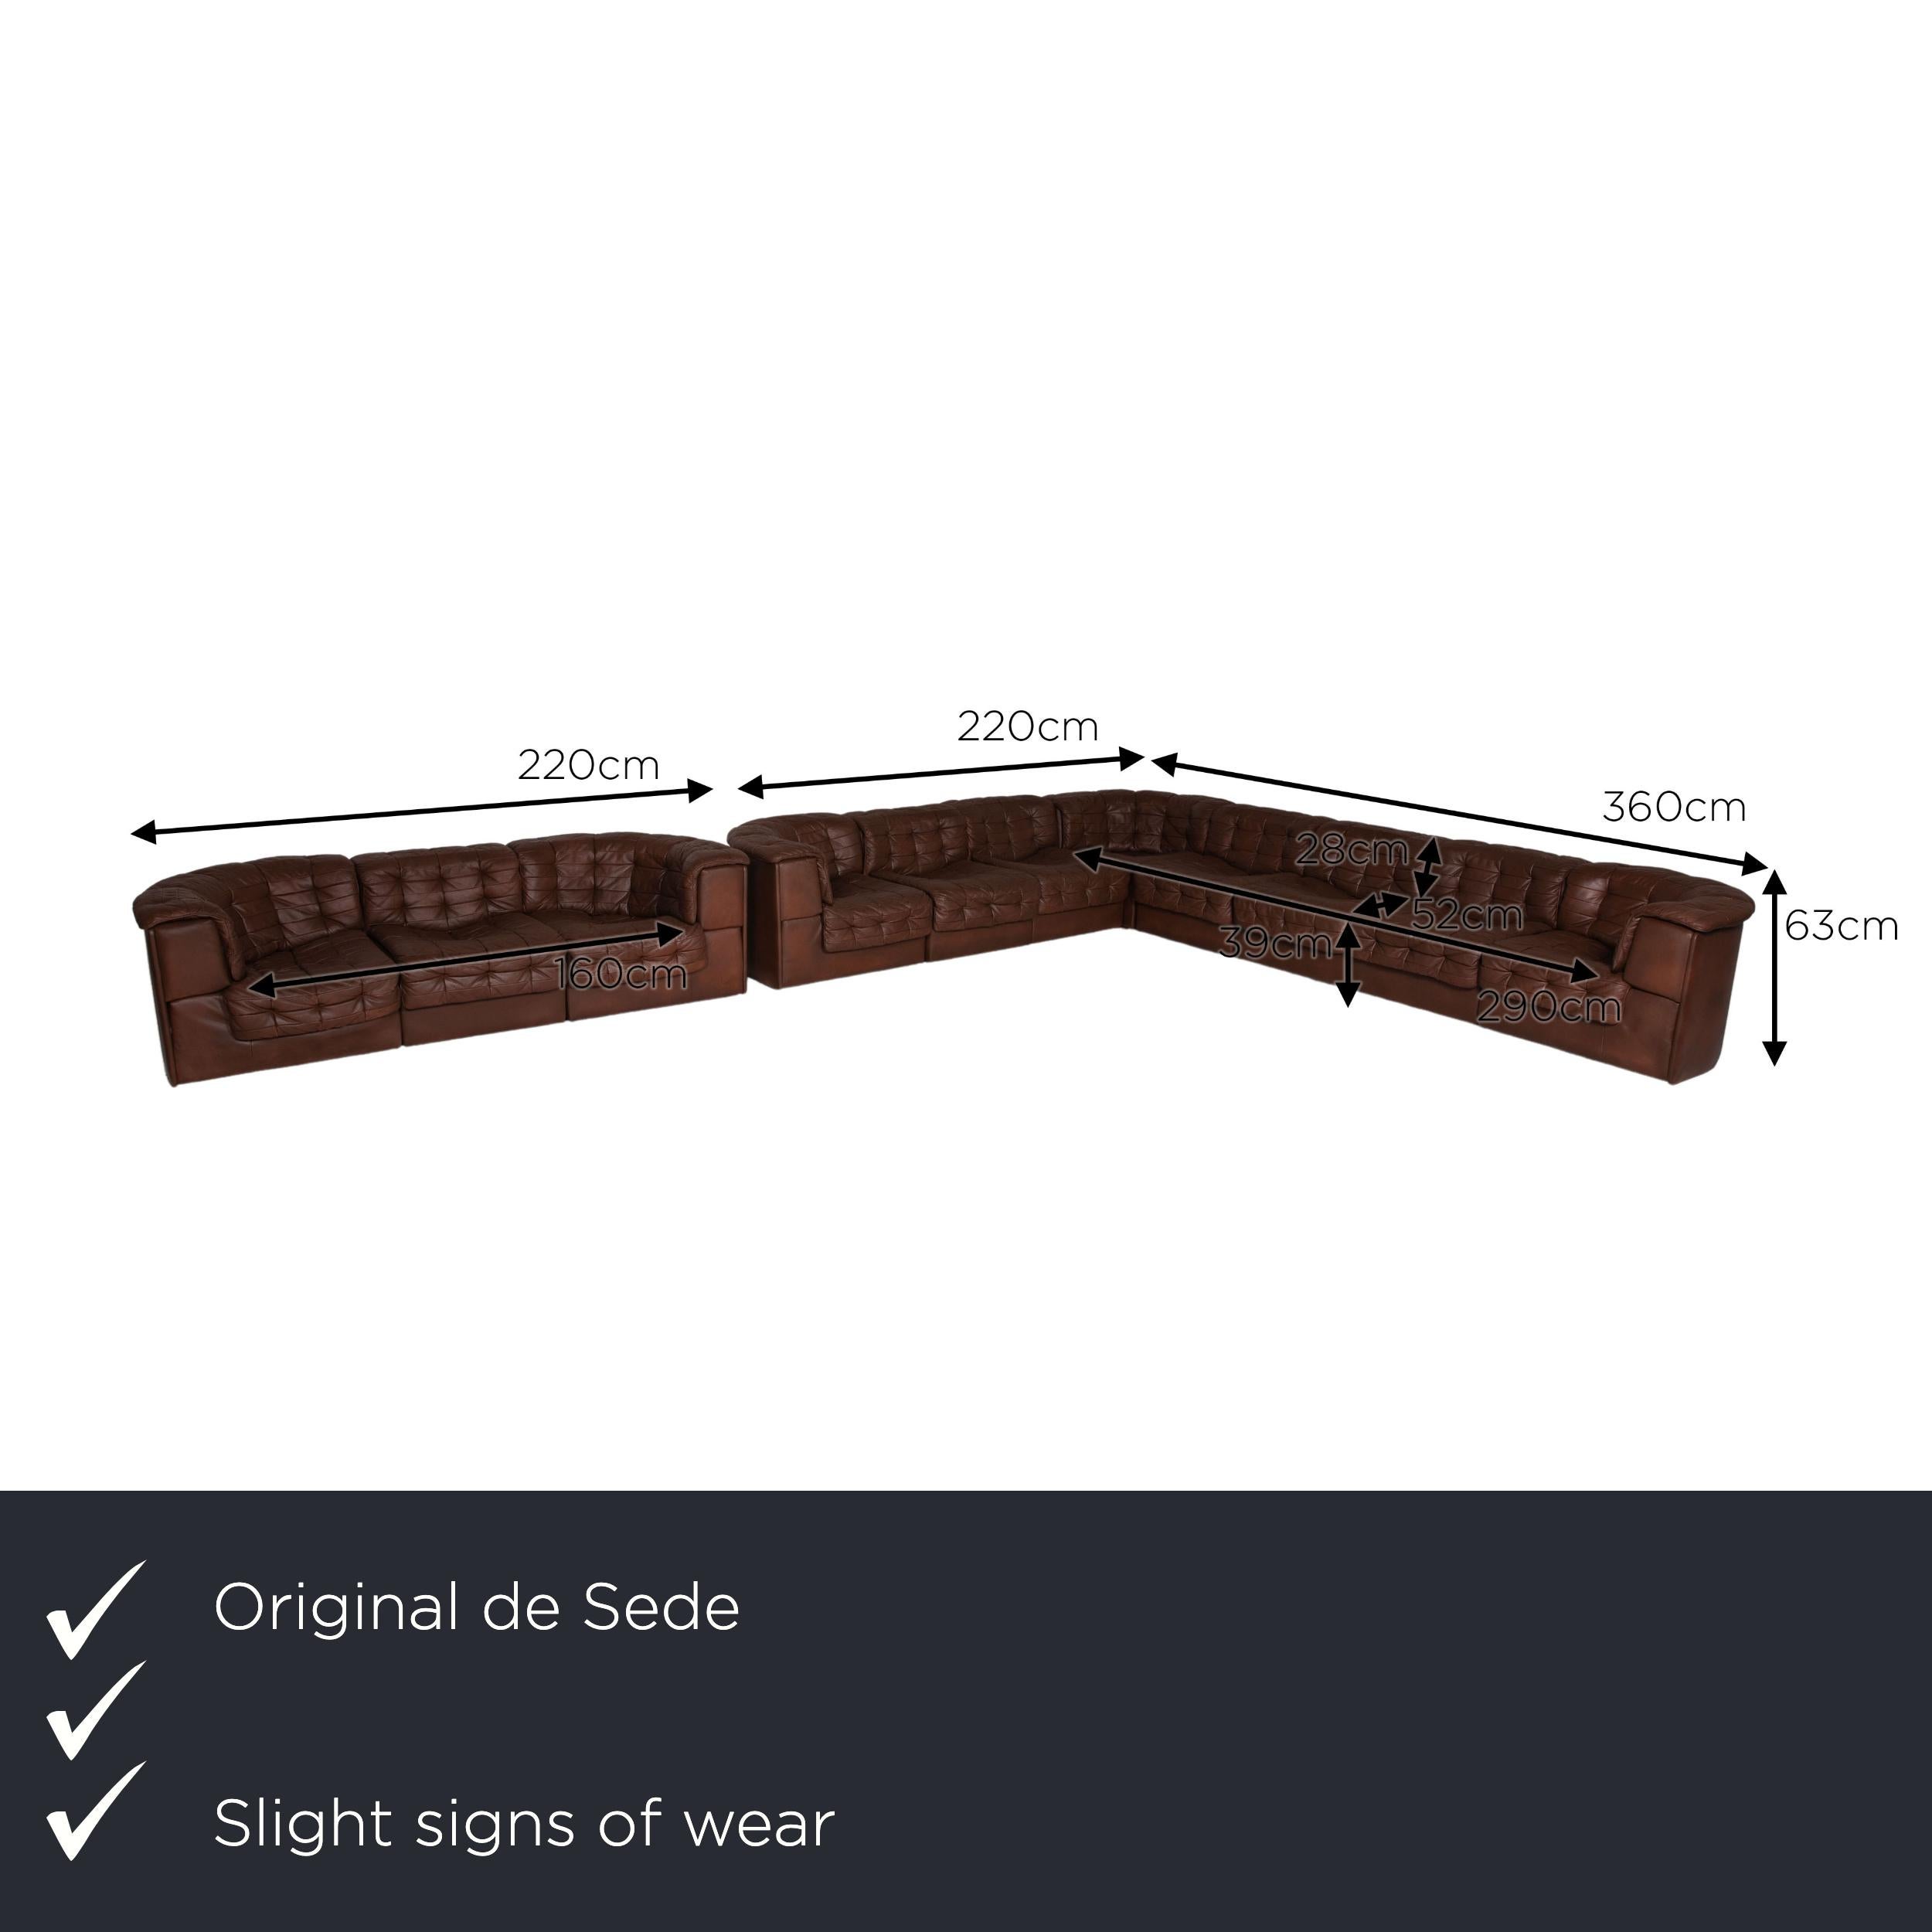 We present to you a De Sede DS 11 leather corner sofa set brown couch modular.

Product measurements in centimeters:

depth: 86
width: 220
height: 63
seat height: 39
rest height: 63
seat depth: 52
seat width: 160
back height: 28.

